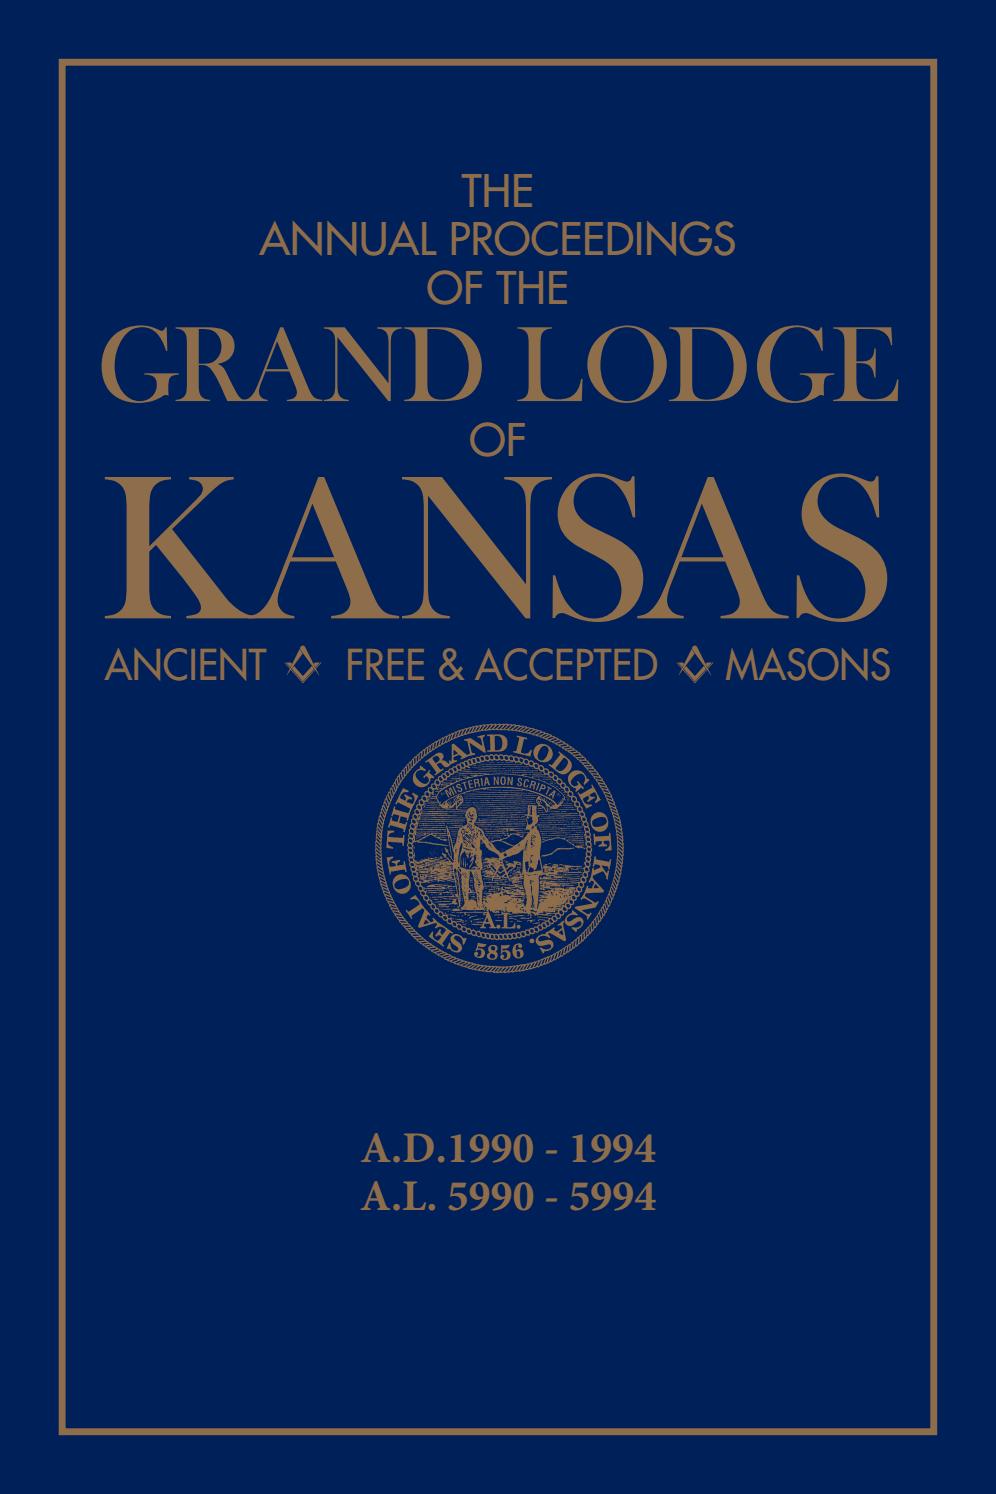 Canapé Jardin Luxe the Annual Proceedings Of the Grand Lodge Of Kansas Af&am